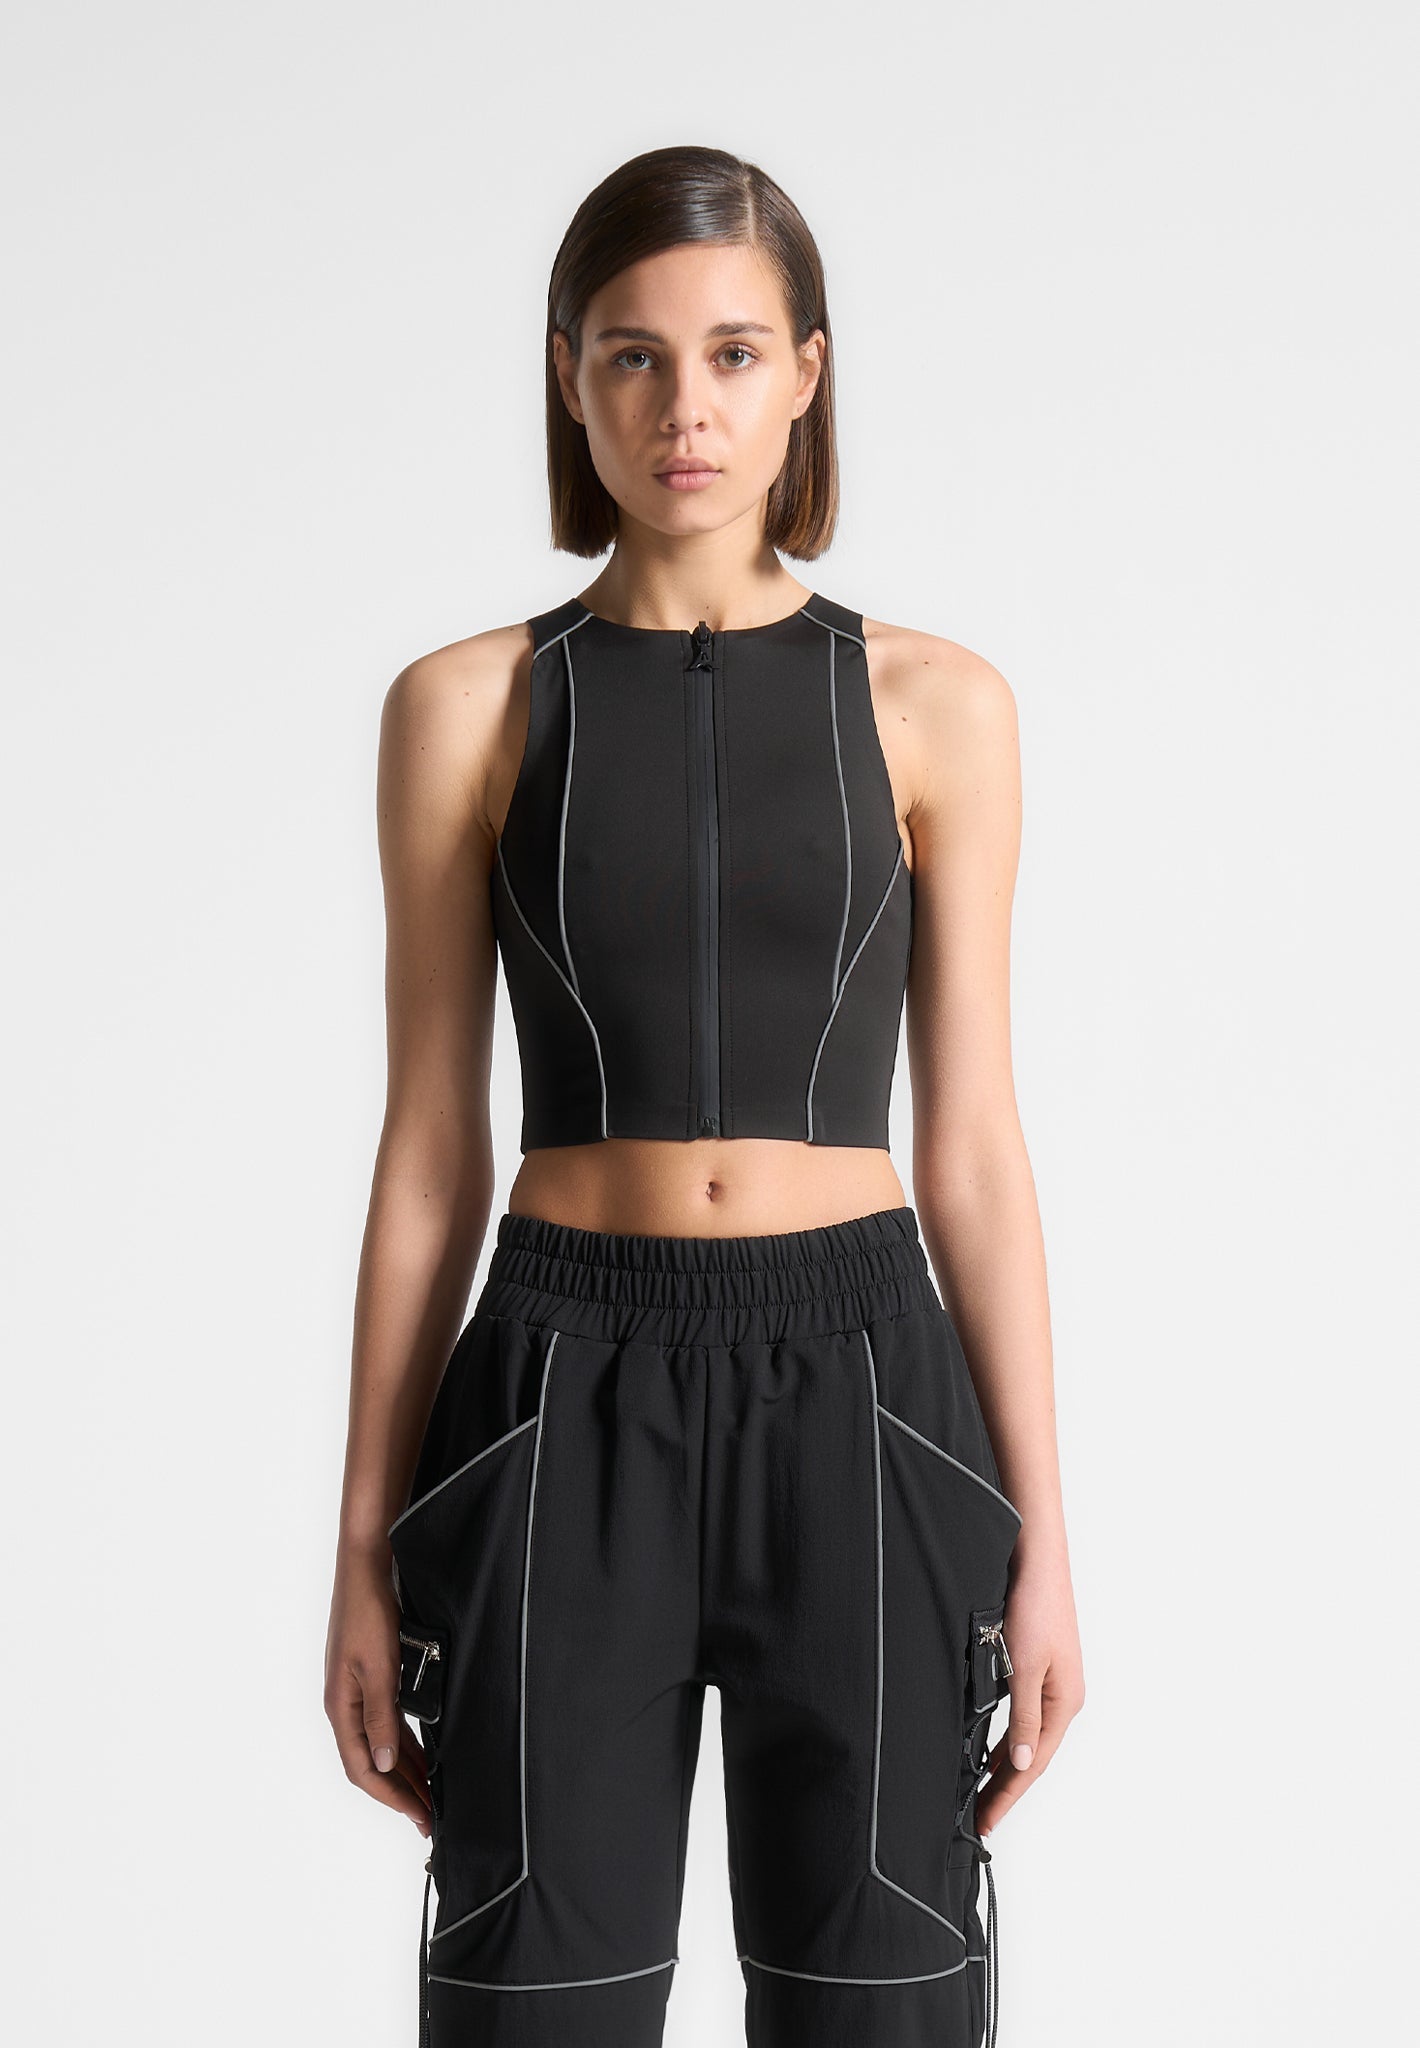 reflective-piped-racer-crop-top-black